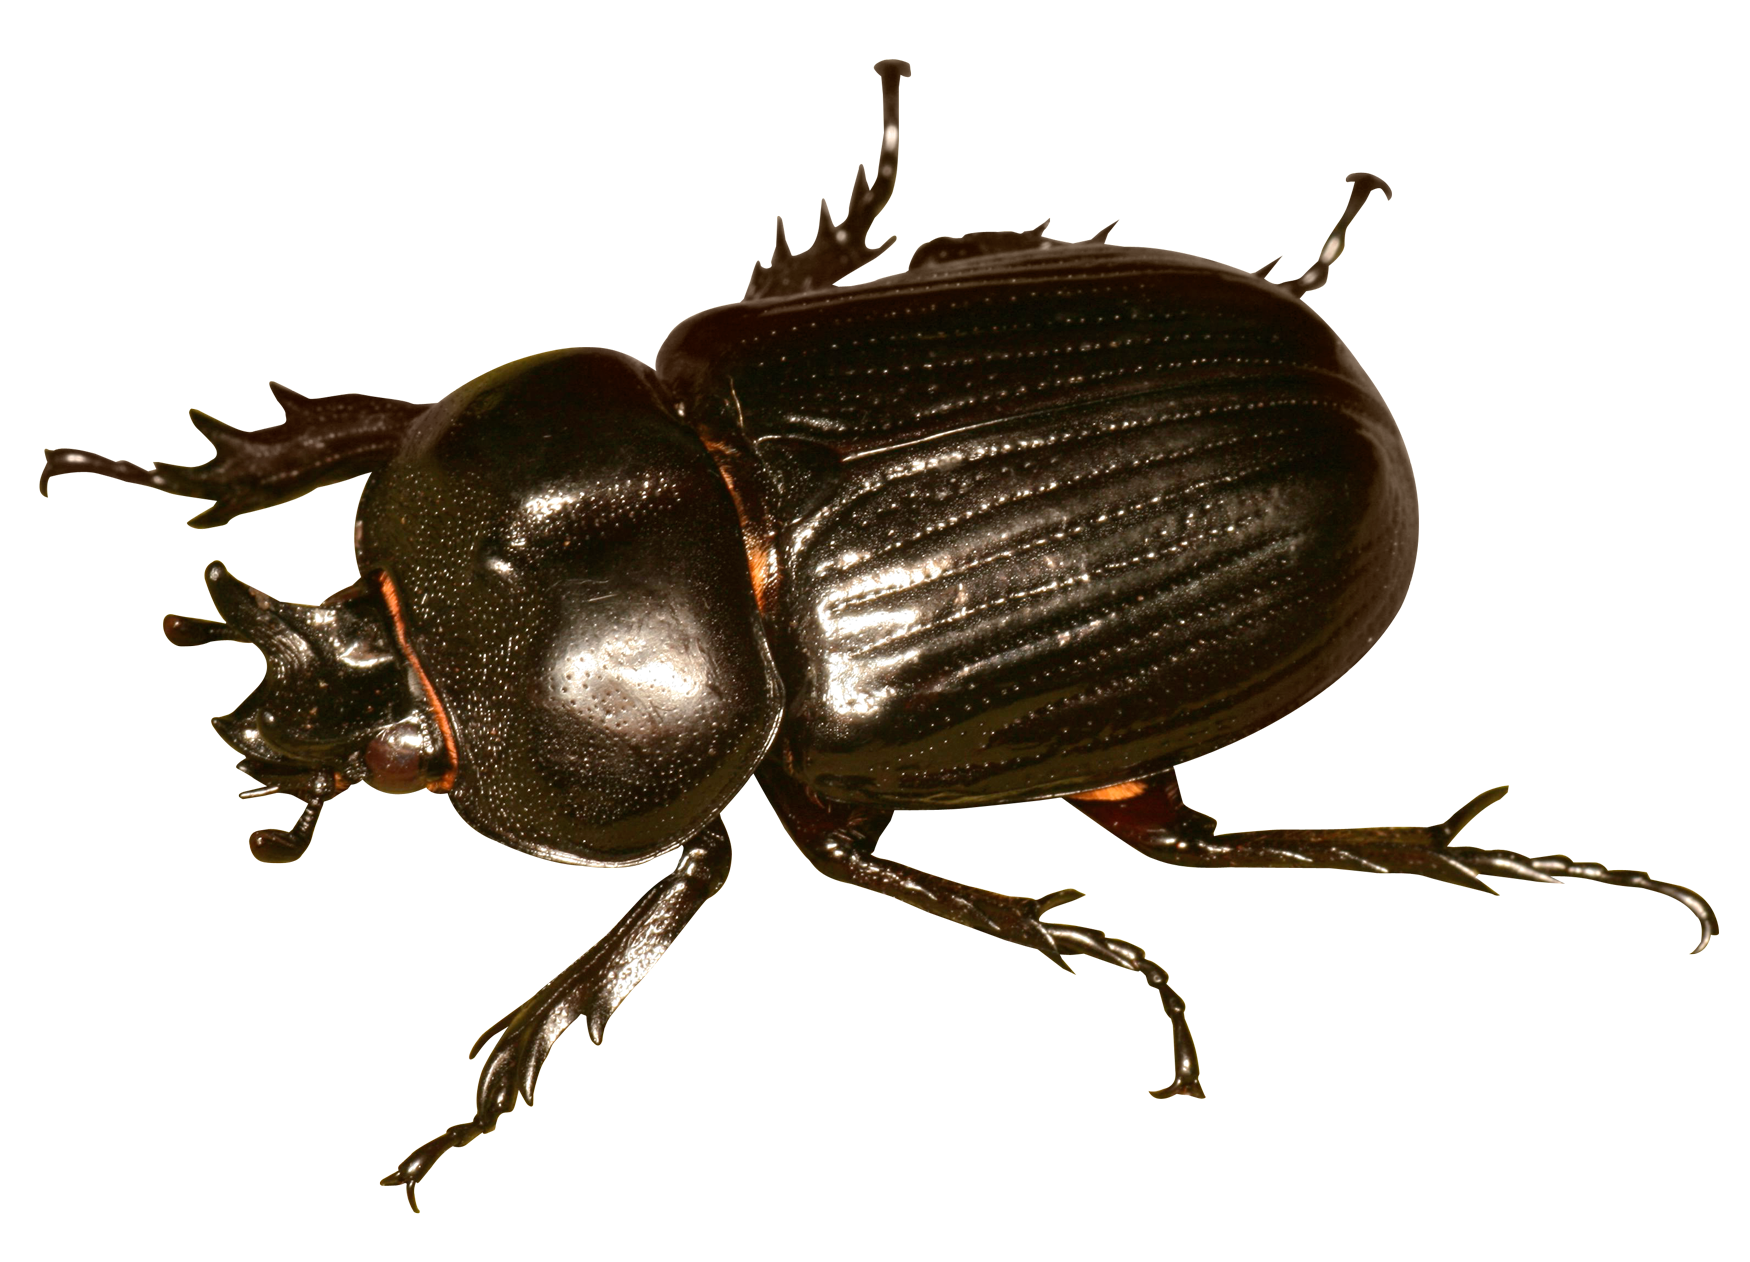 A Close Up Of A Beetle